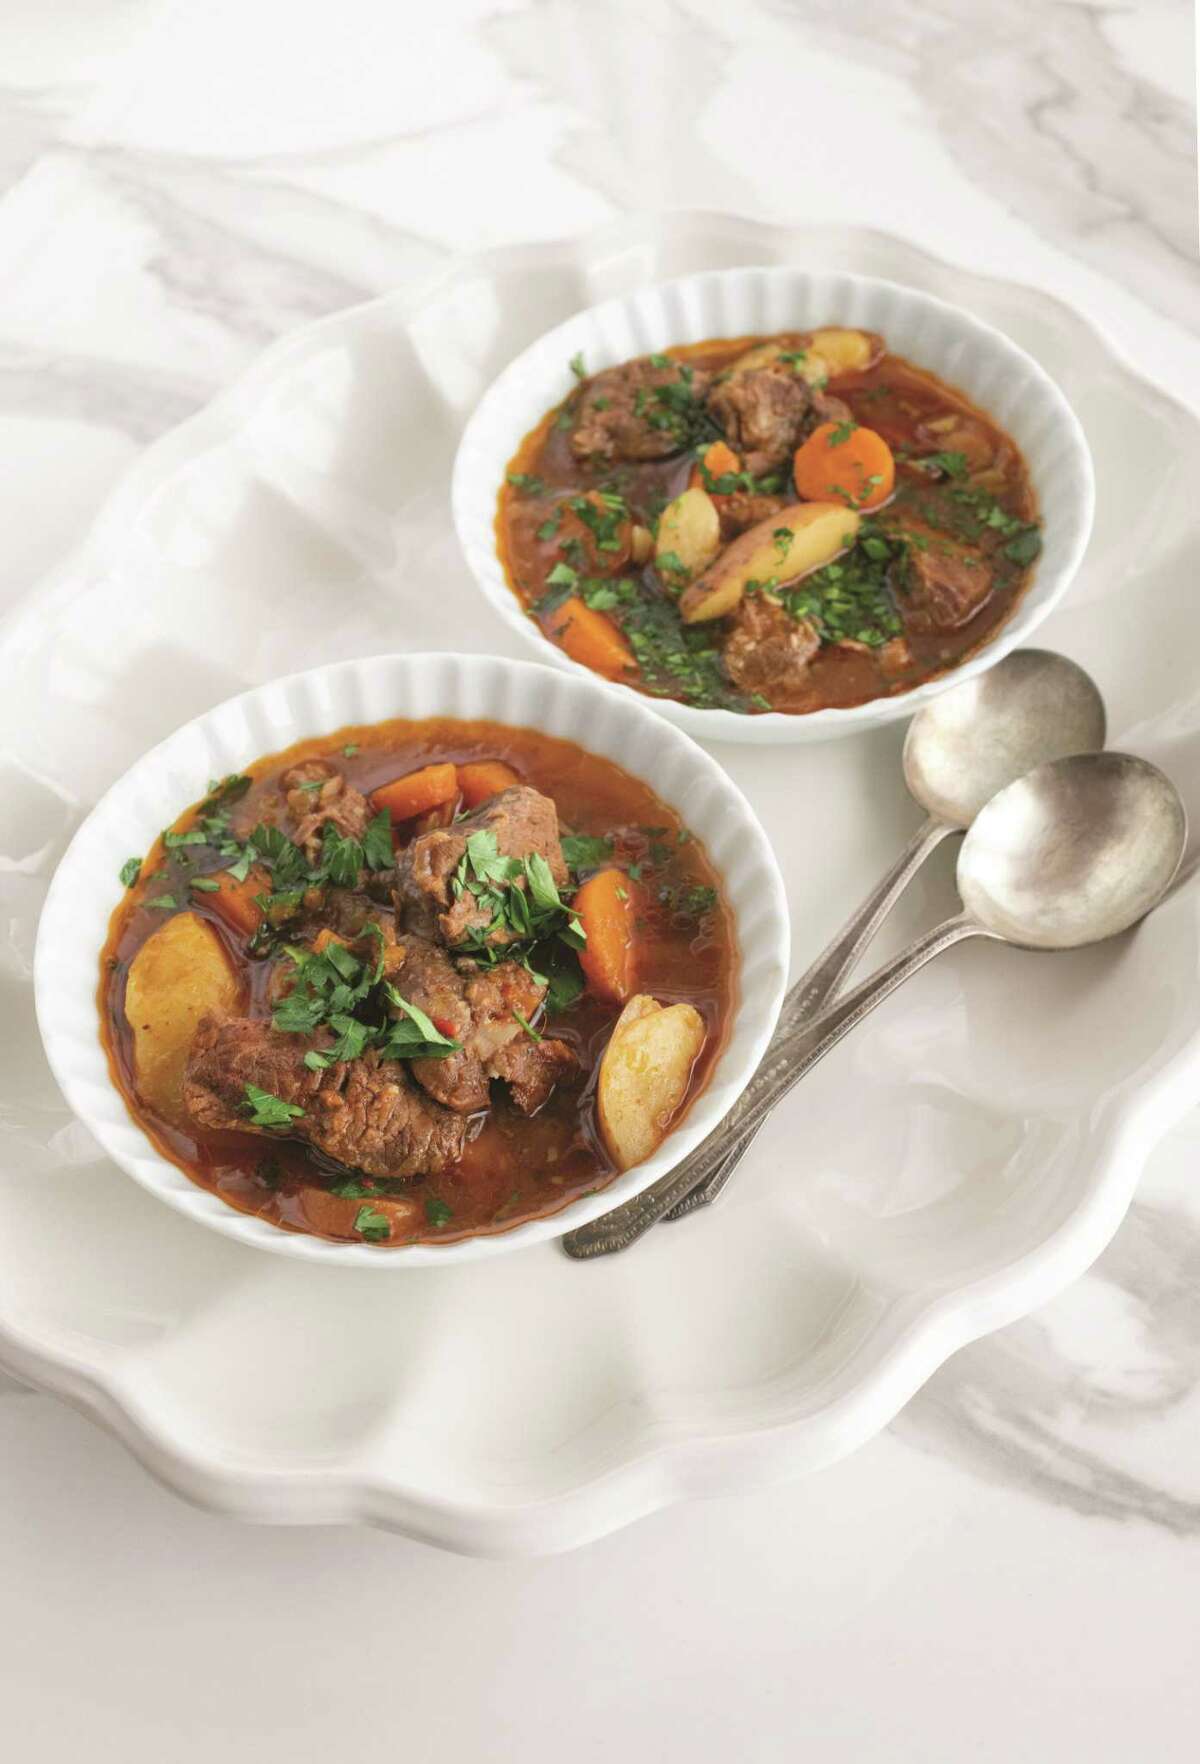 Harissa Beef Stew from "Dinner is Done" by Marcia Smart.